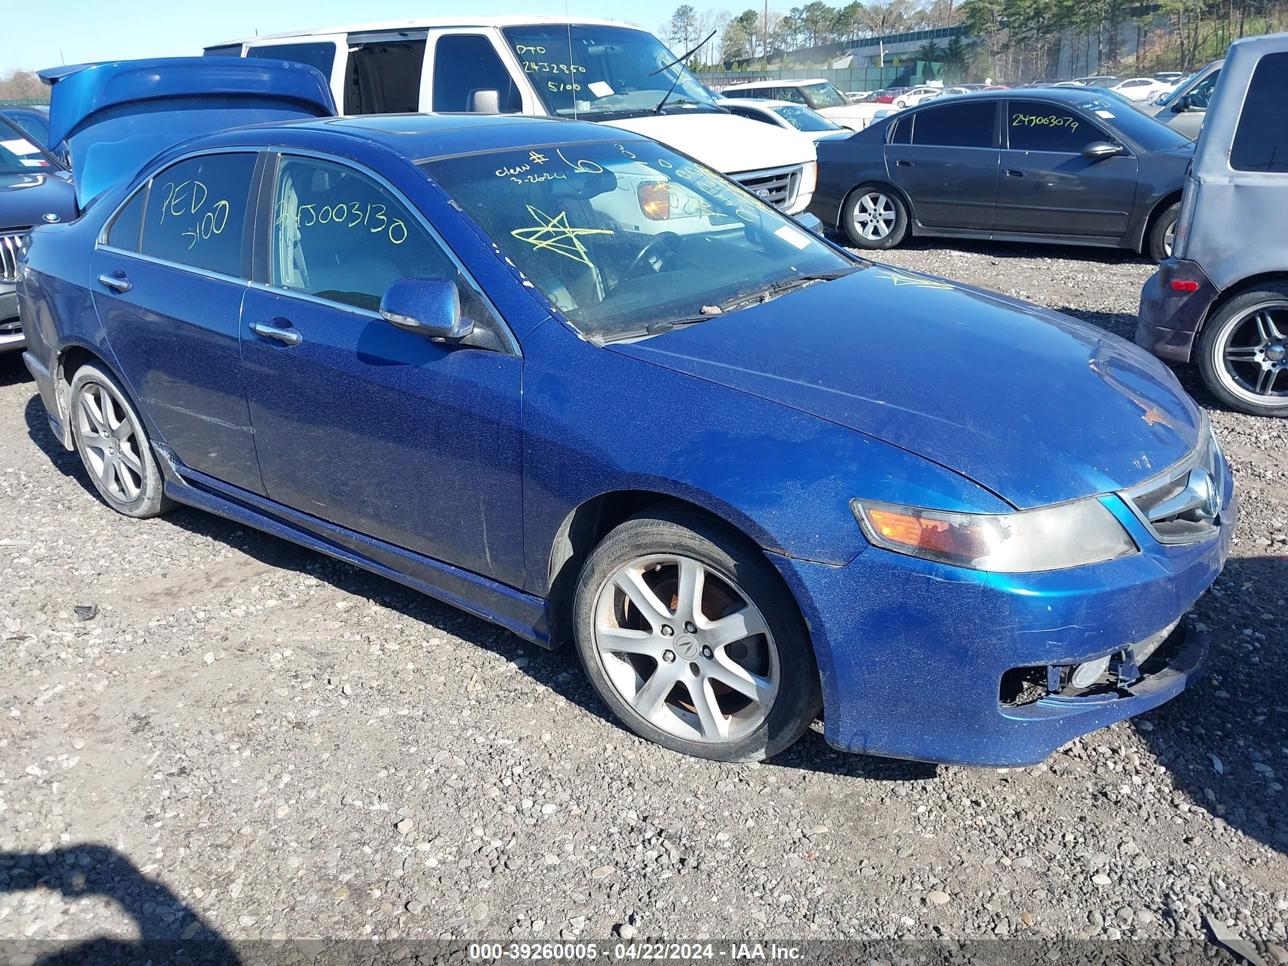 vin: JH4CL96866C011337 JH4CL96866C011337 2006 acura tsx 2400 for Sale in 11763, 21 Peconic Ave, Medford, New York, USA